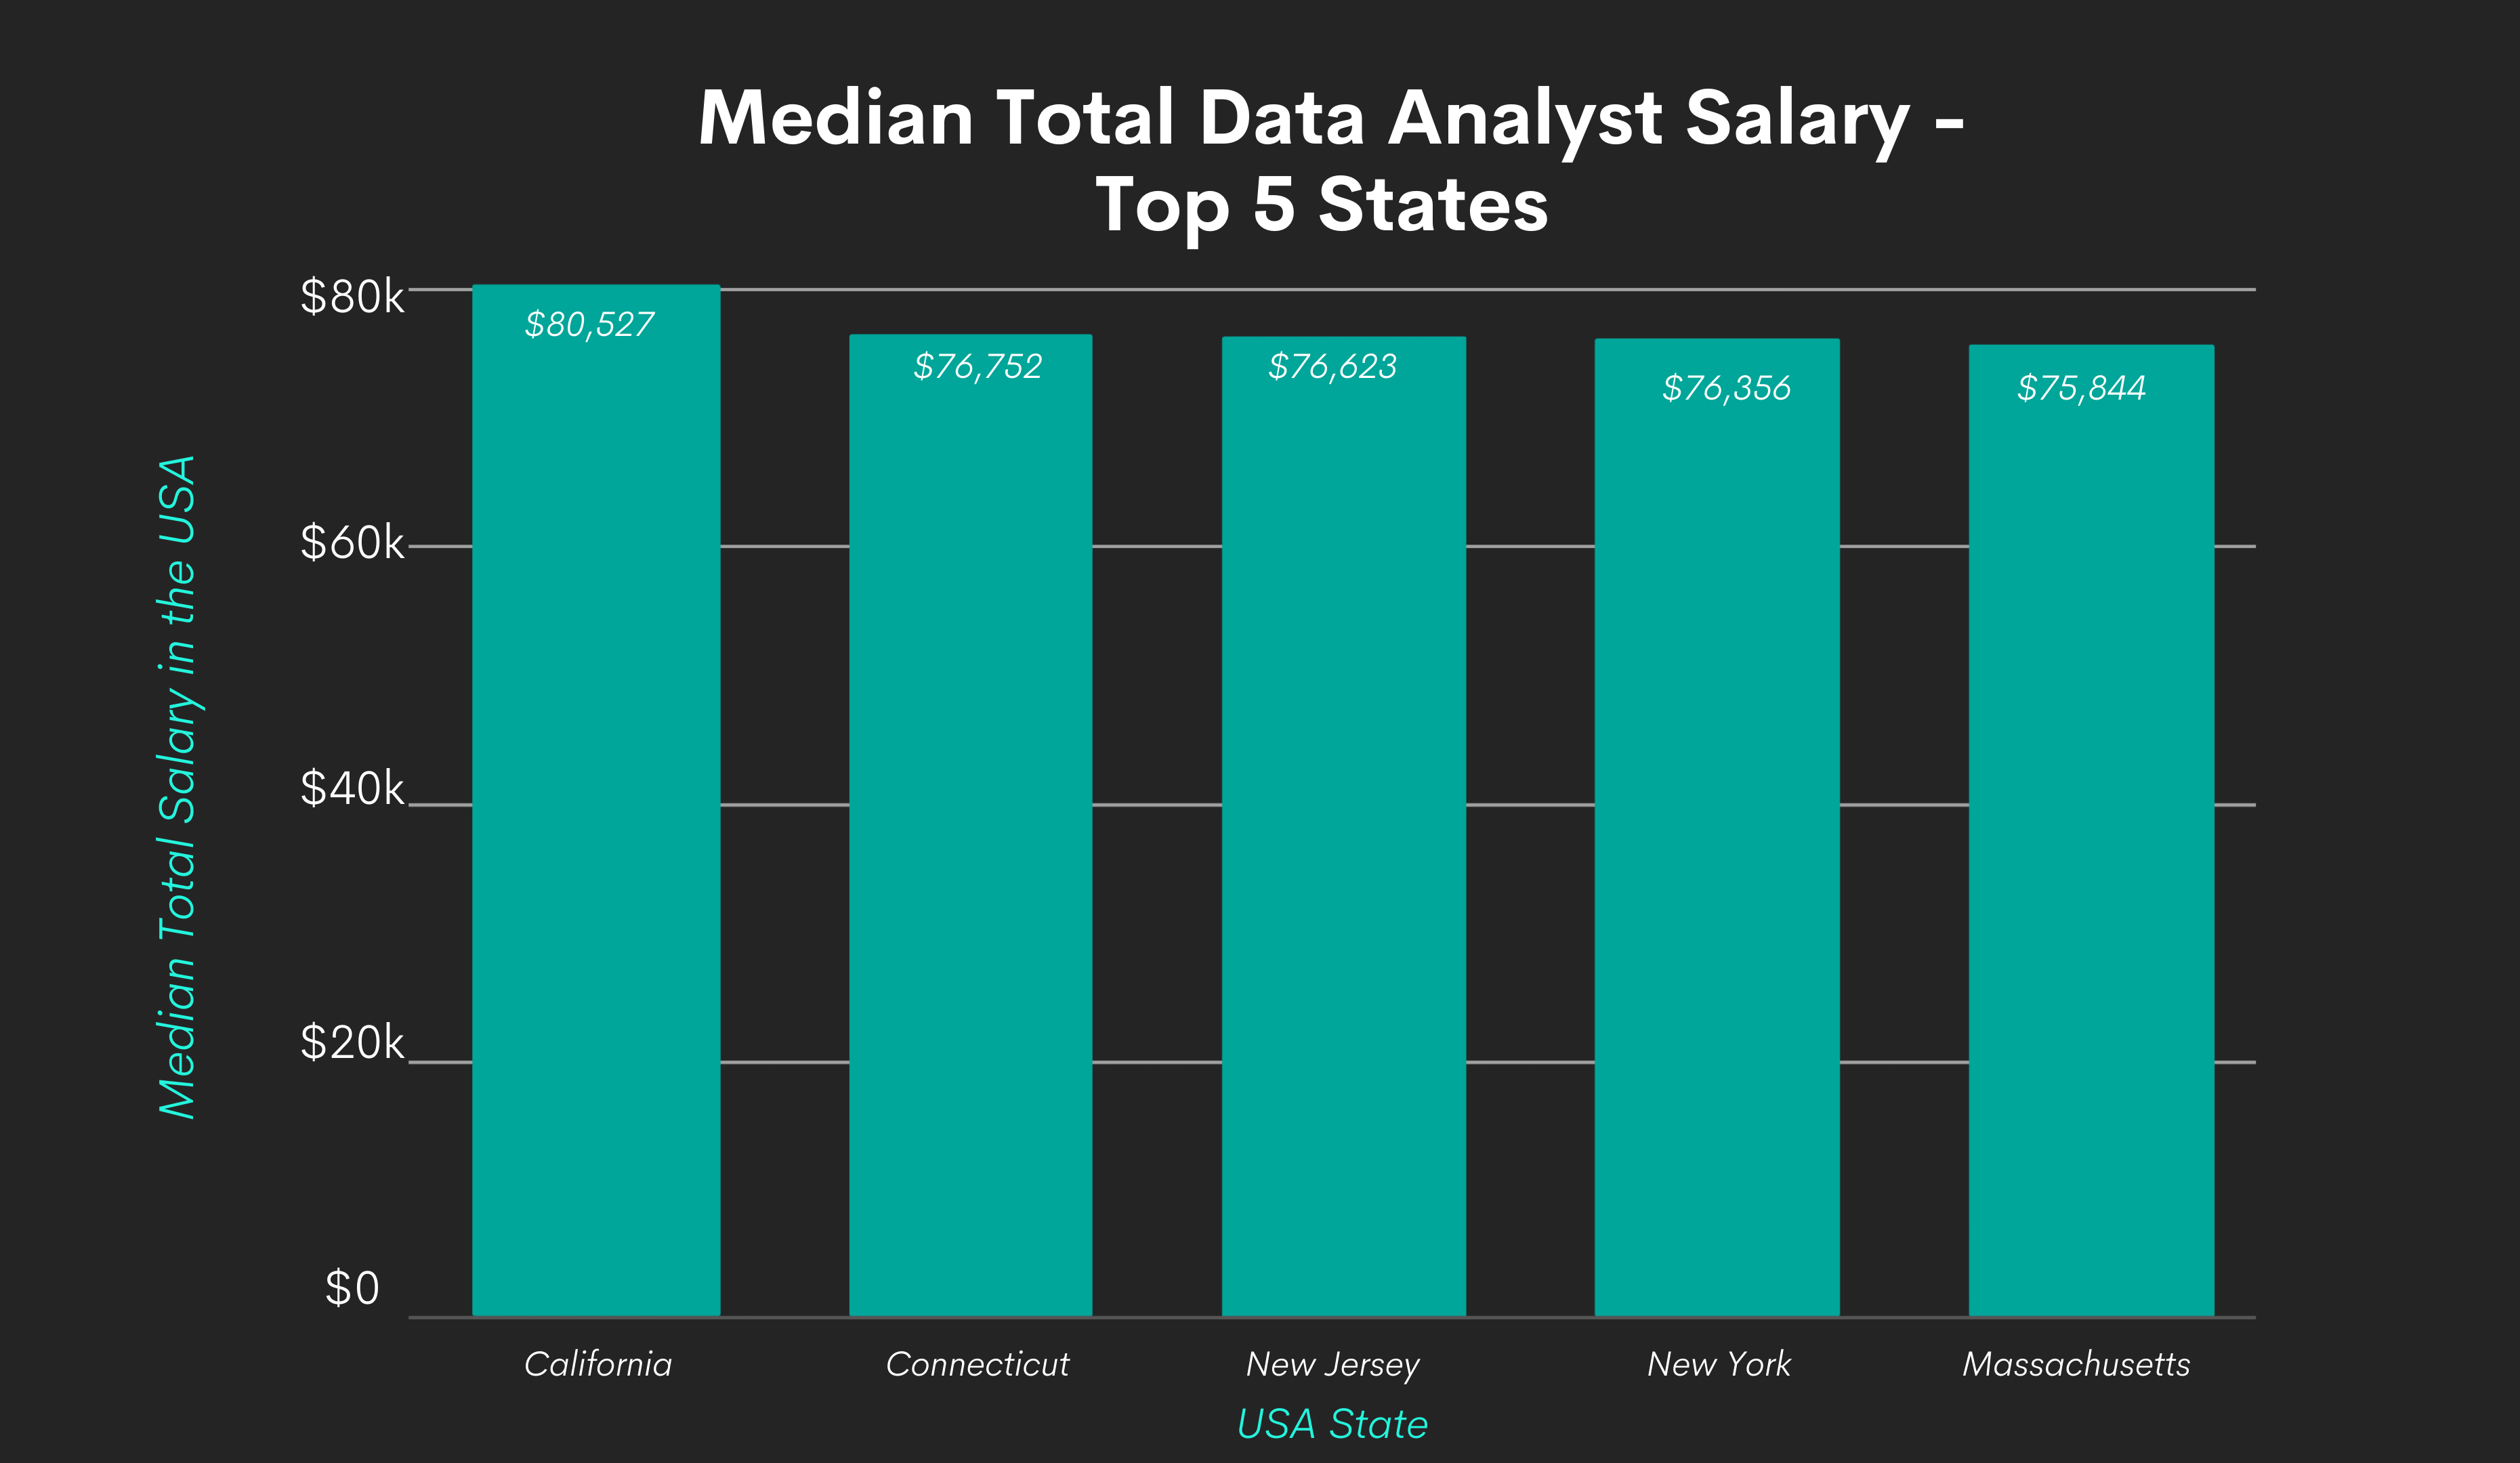 Data Analyst Salary by top 5 USA States